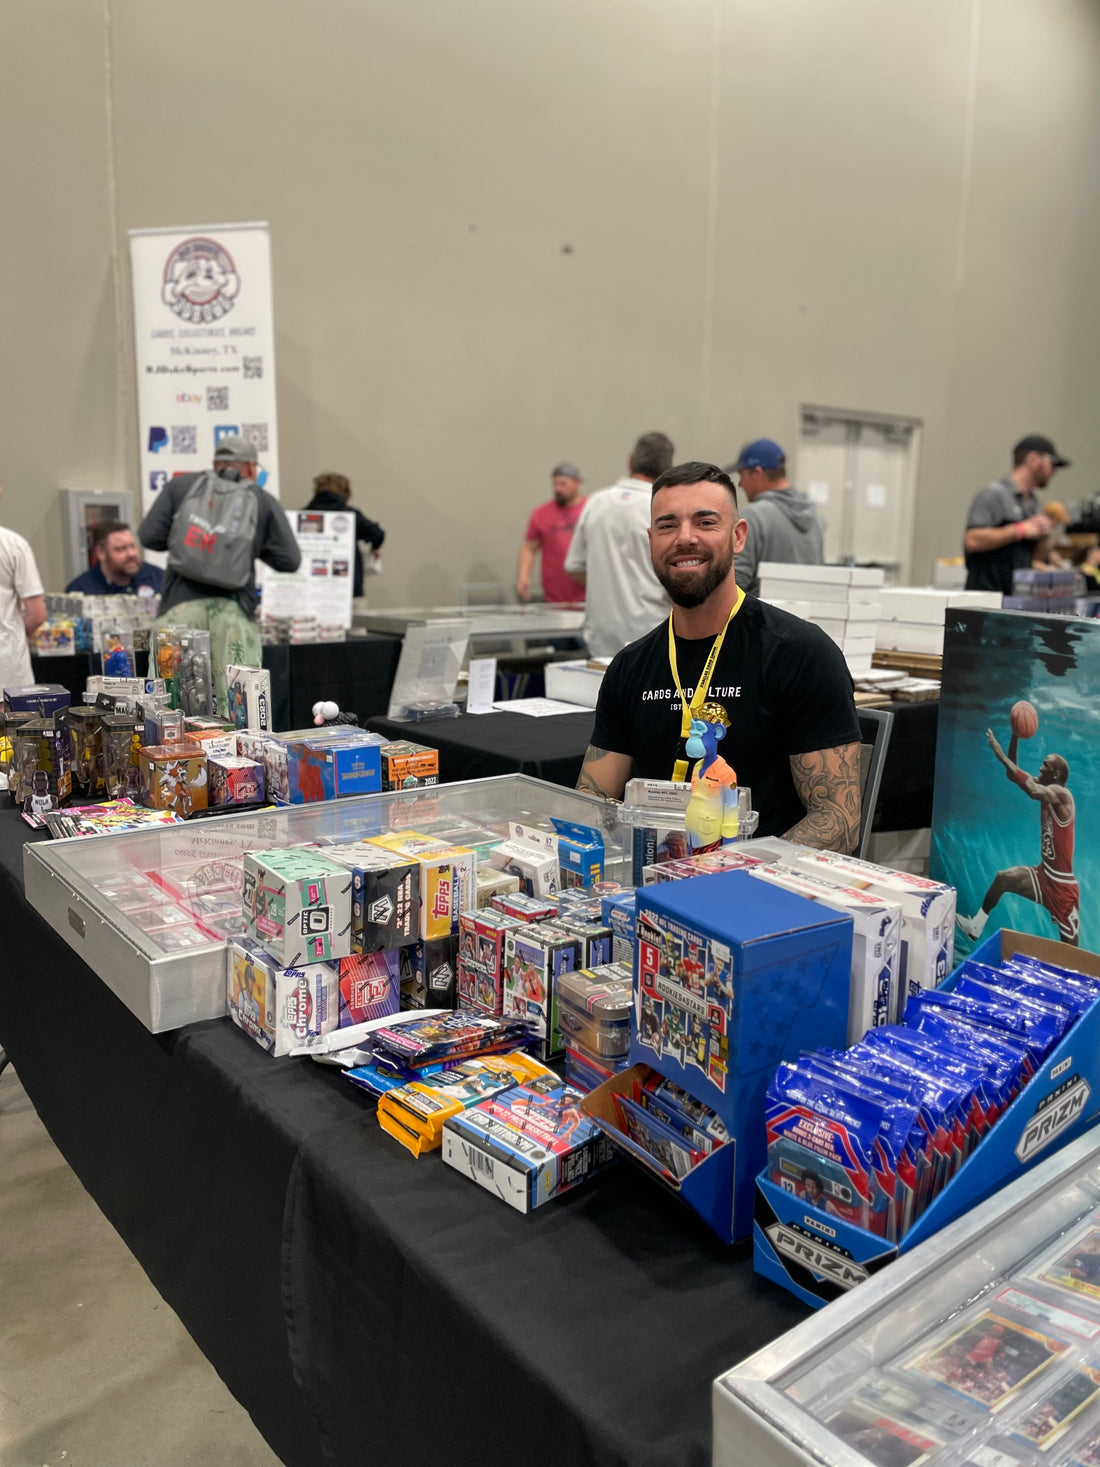 Dallas Card Show is a hit